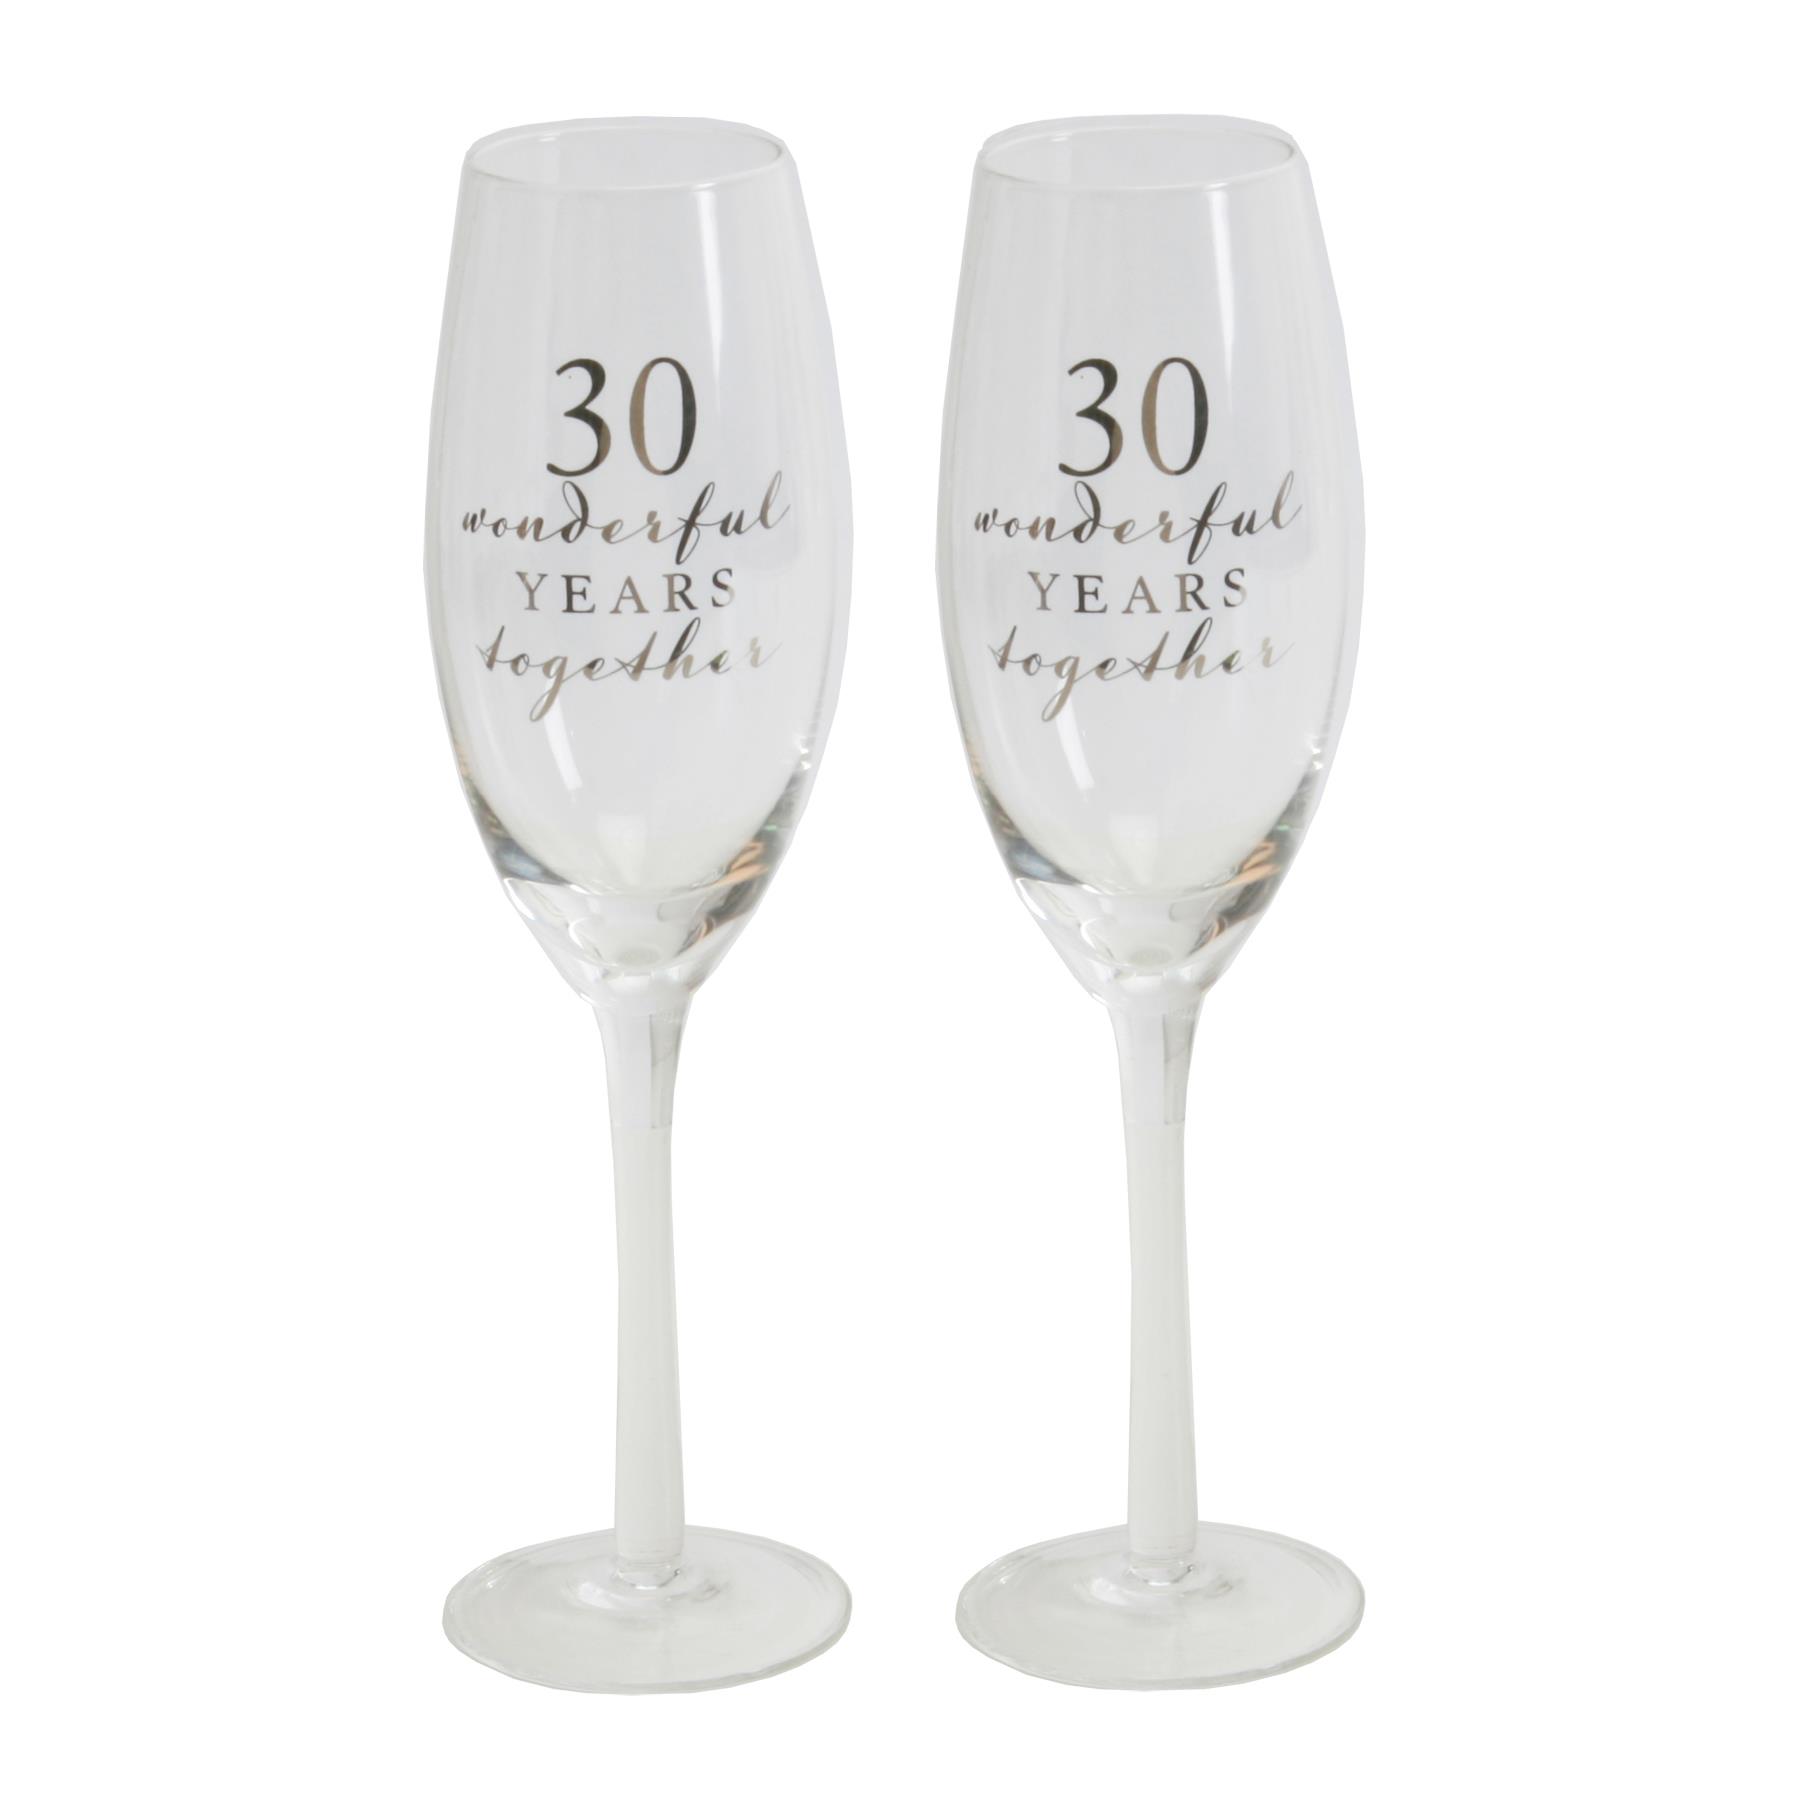 Amore Set of 2 Gift Boxed Champagne Flutes - 30th Anniversary